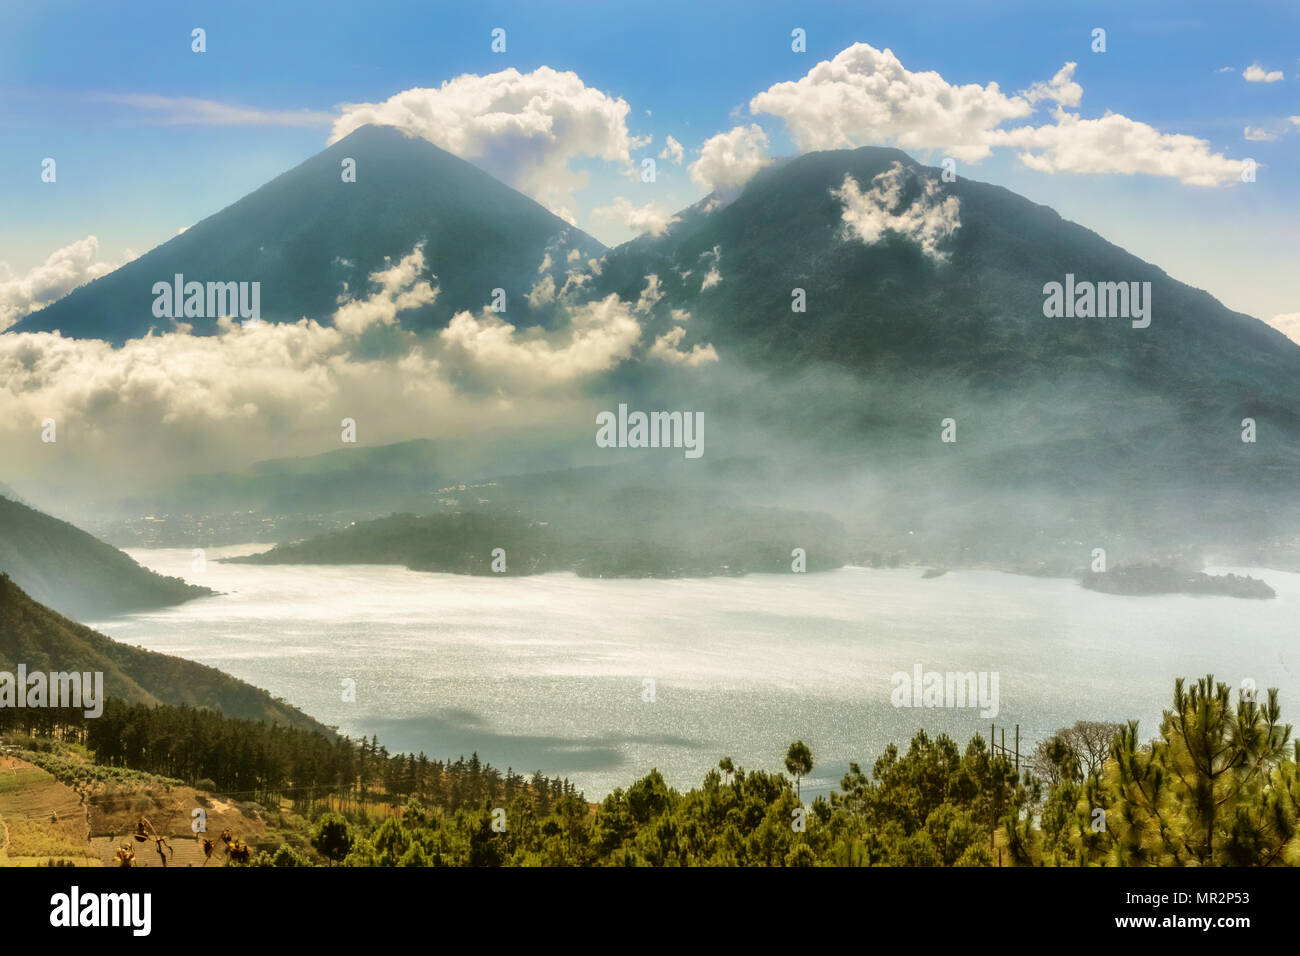 Landscape view at Lake Atitlan. At 1512m above sea level it is a body of water in a massive volcanic crater in Guatemala’s southwestern highlands. Stock Photo